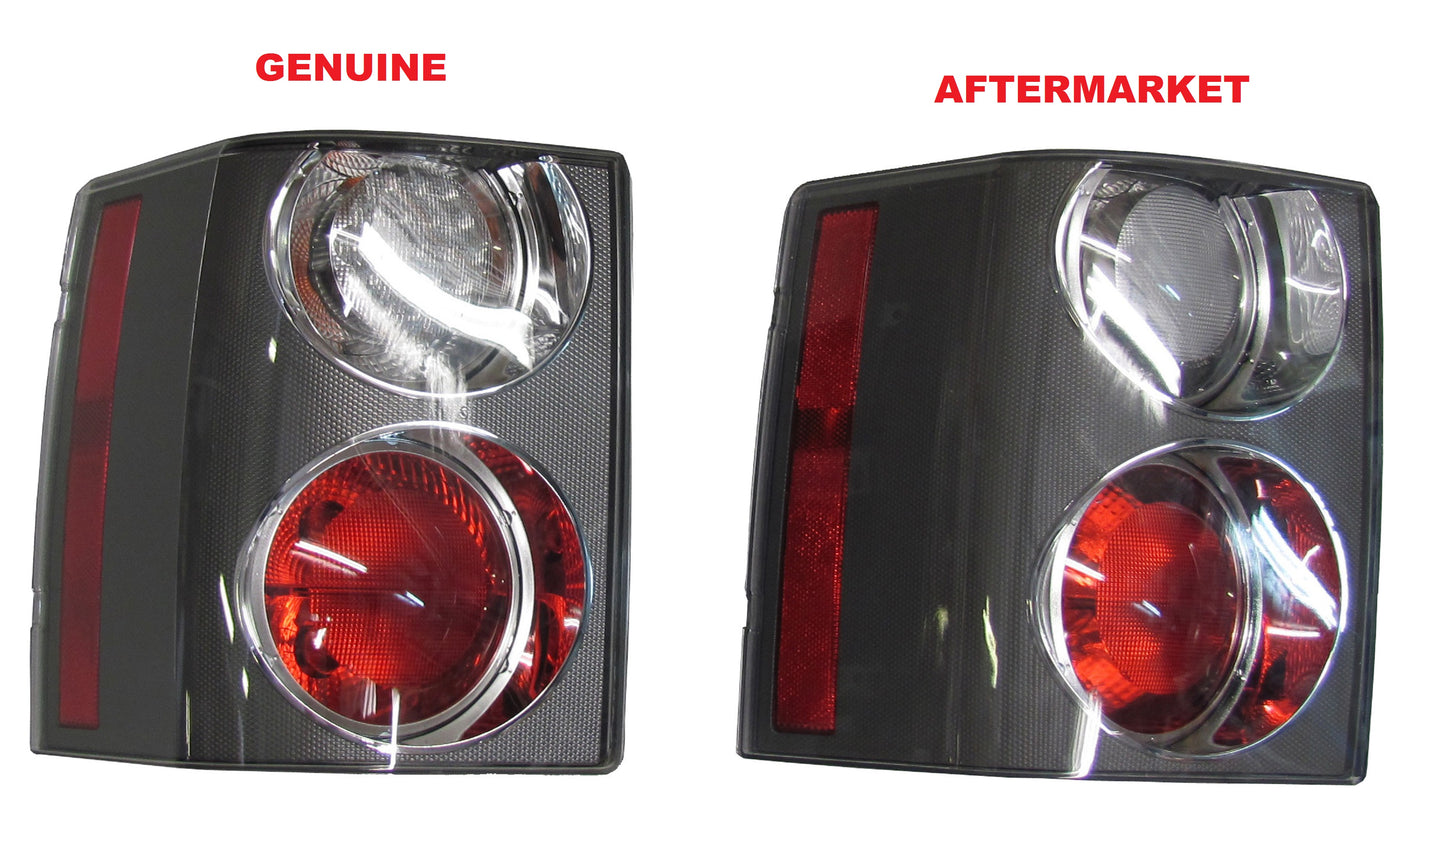 Rear Light Clear/Red for Range Rover L322 2005-09 - LEFT LH